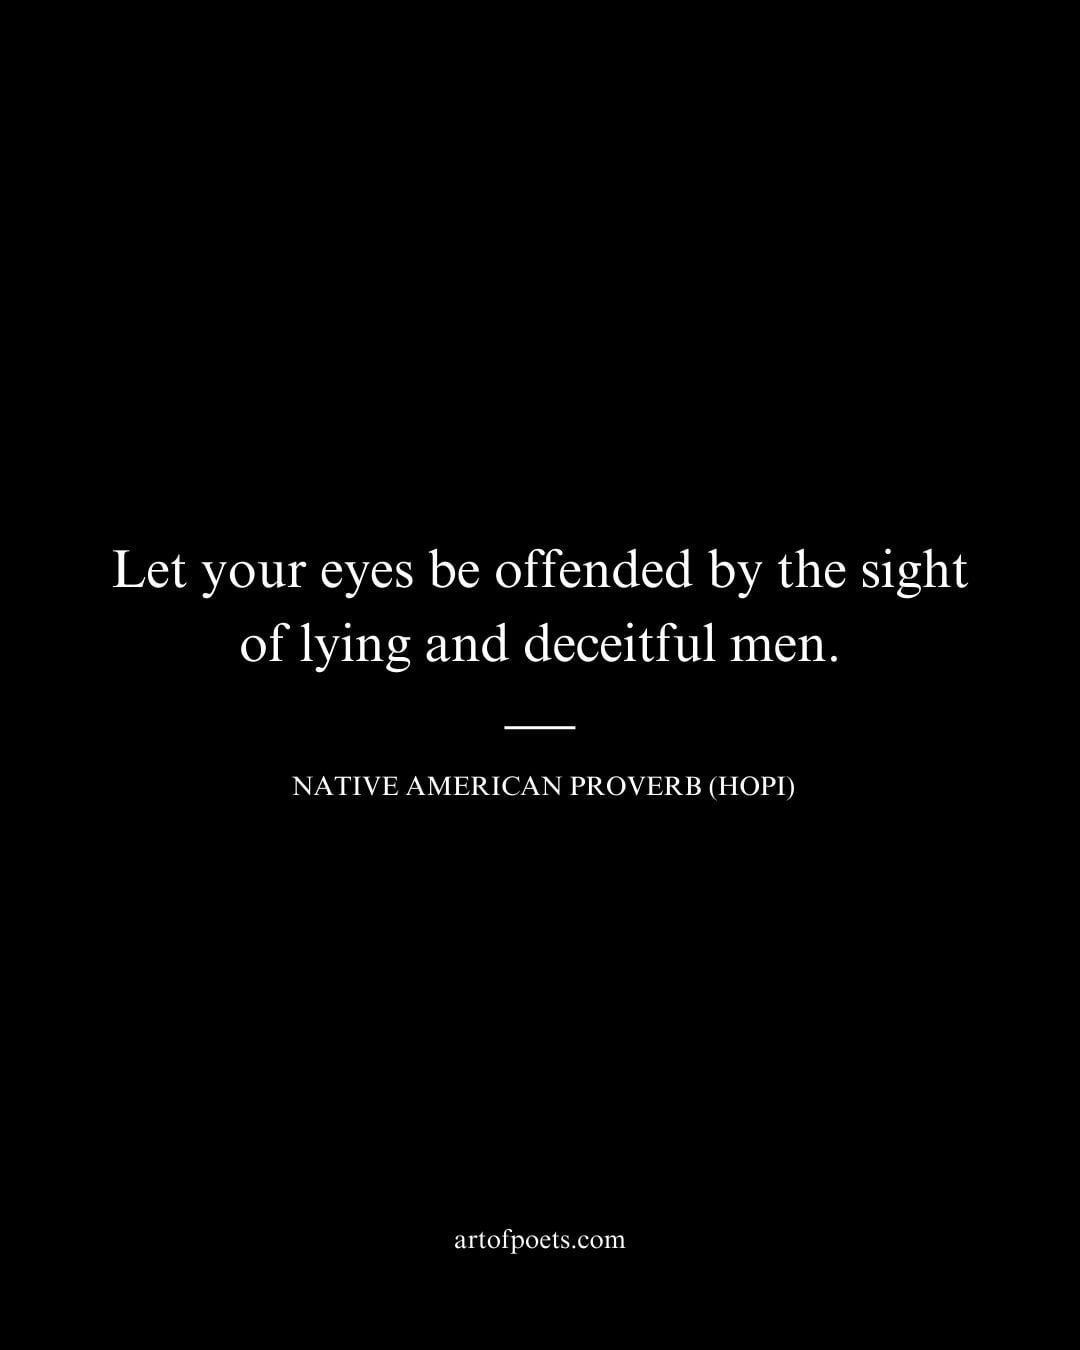 Let your eyes be offended by the sight of lying and deceitful men